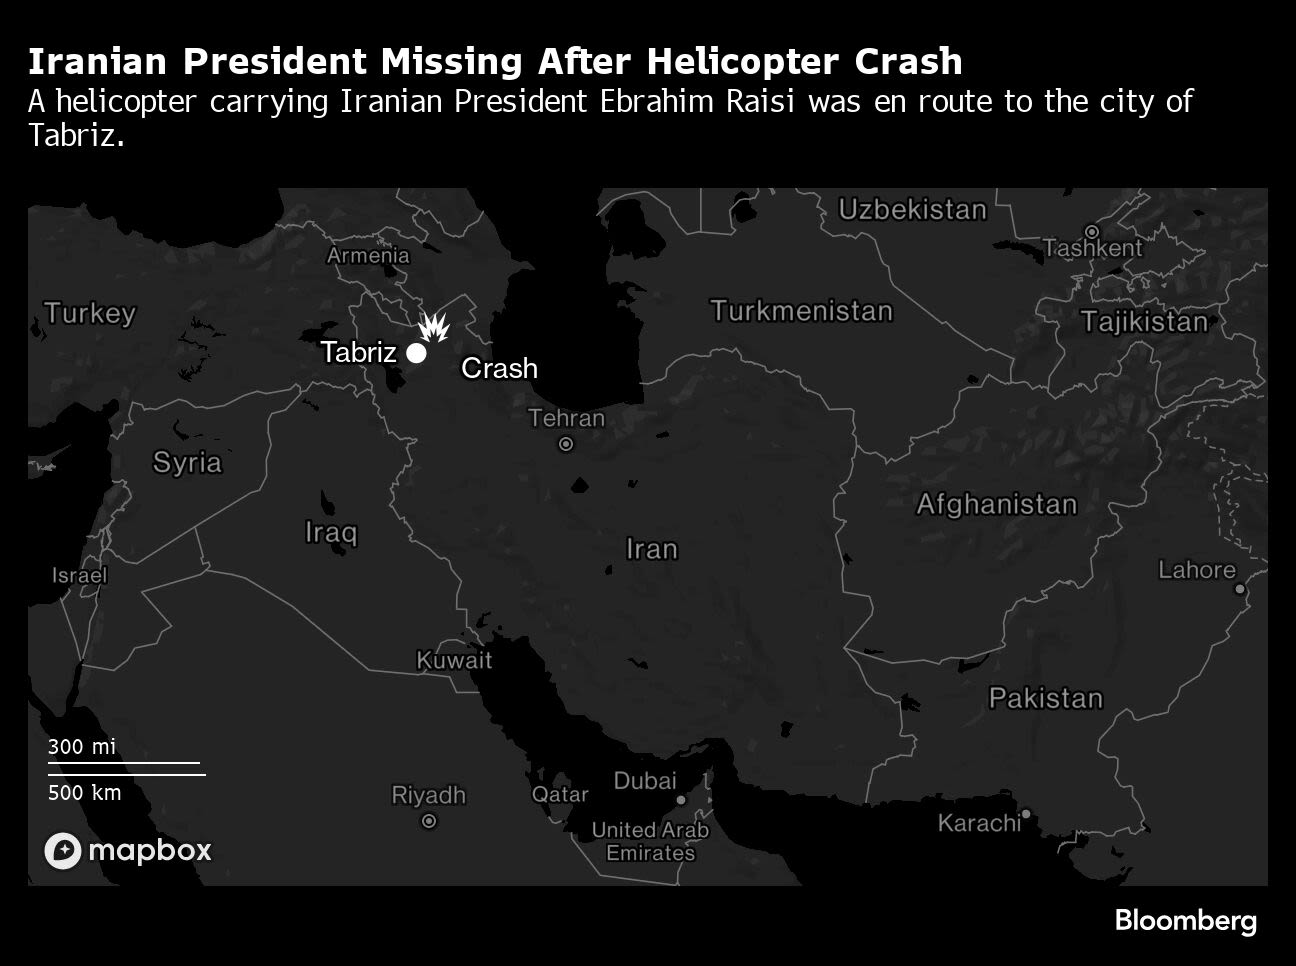 Rescuers Found No Signs of Life at Iran Crash Site: Full Story